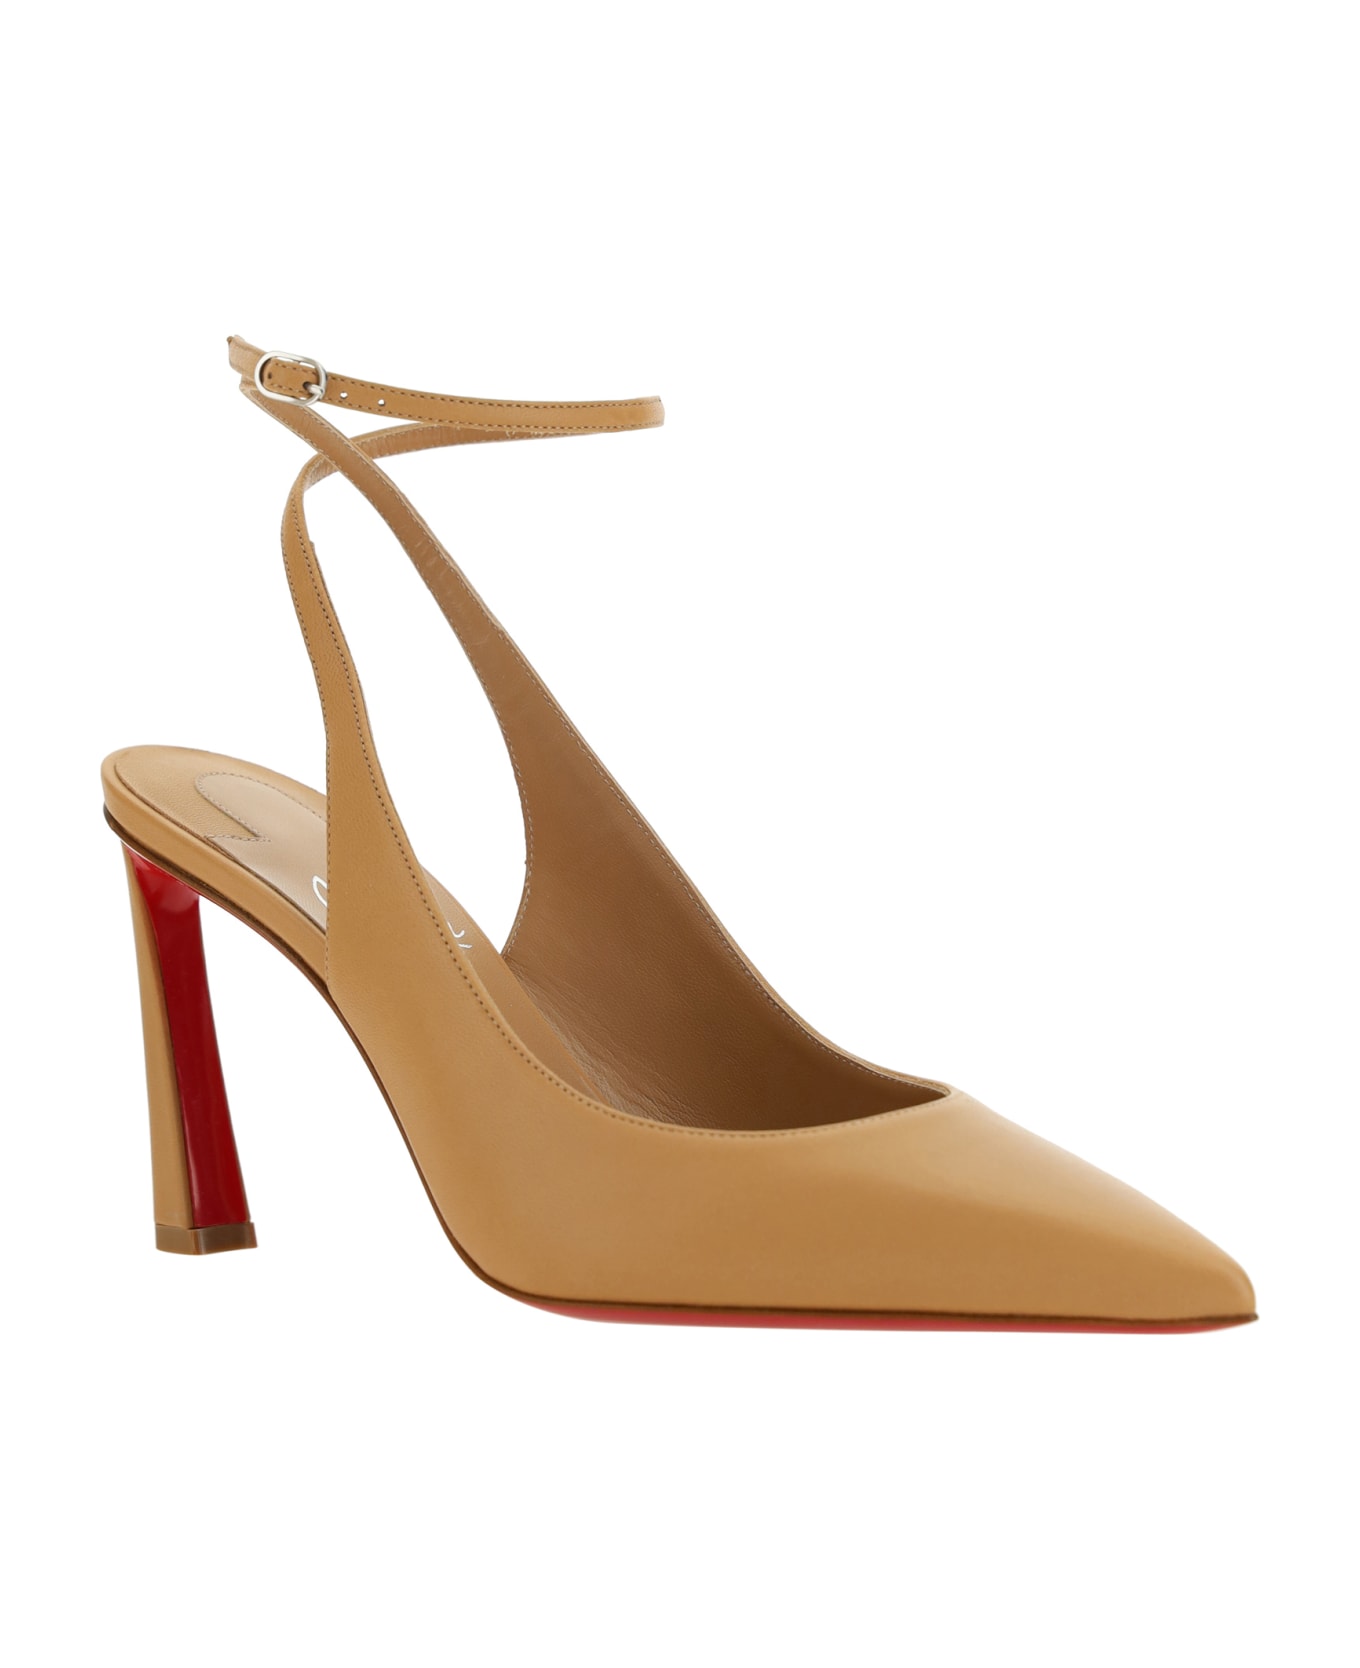 Christian Louboutin Condora Strap Pumps - Toffee/lin Toffee ハイヒール